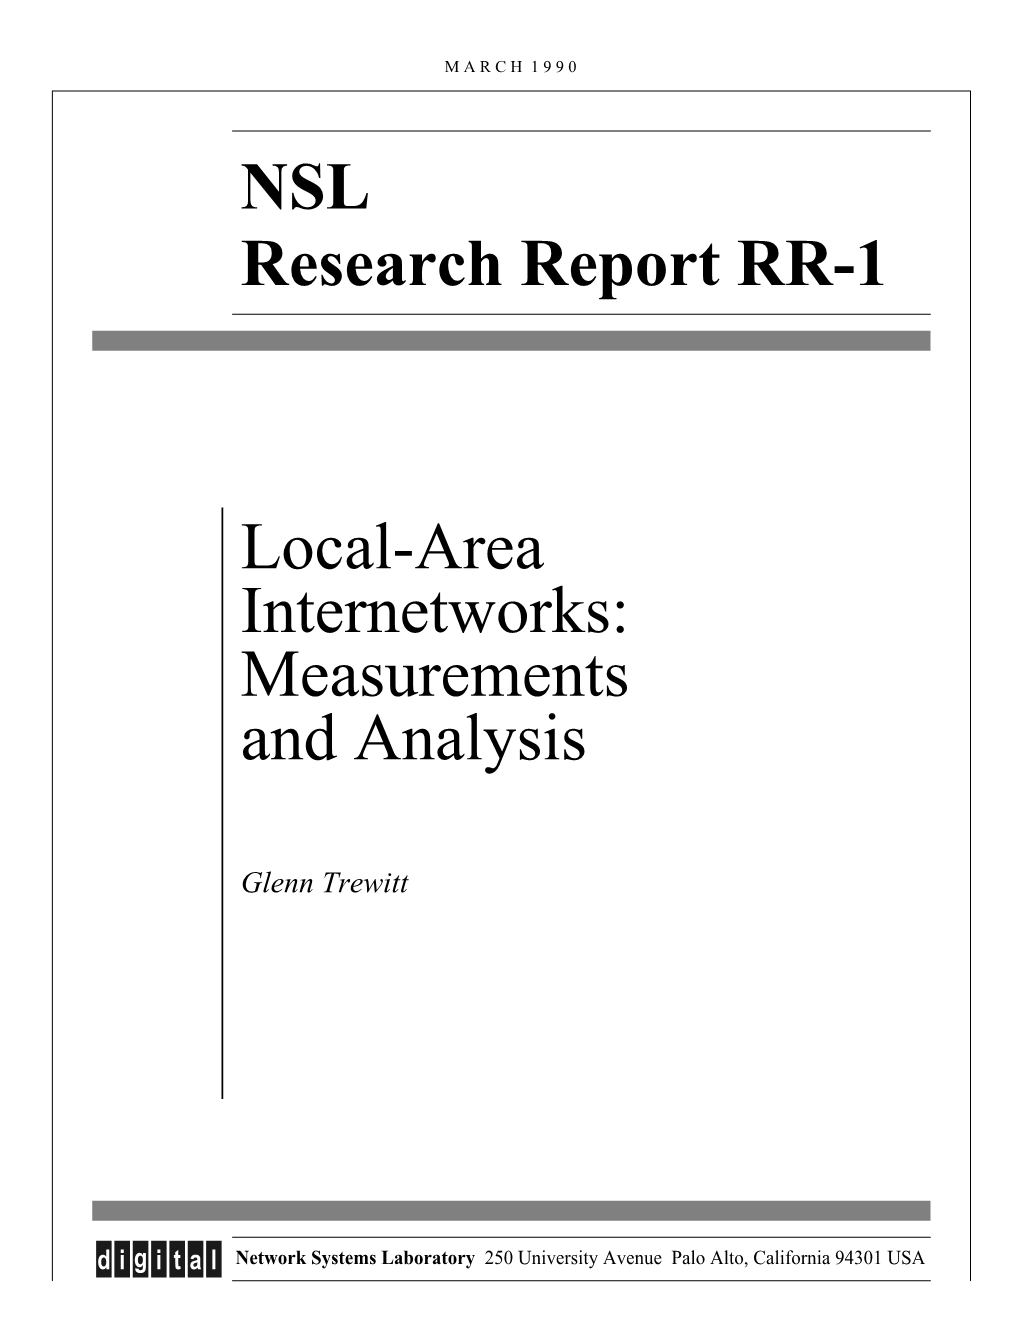 Local-Area Internetworks: Measurements and Analysis